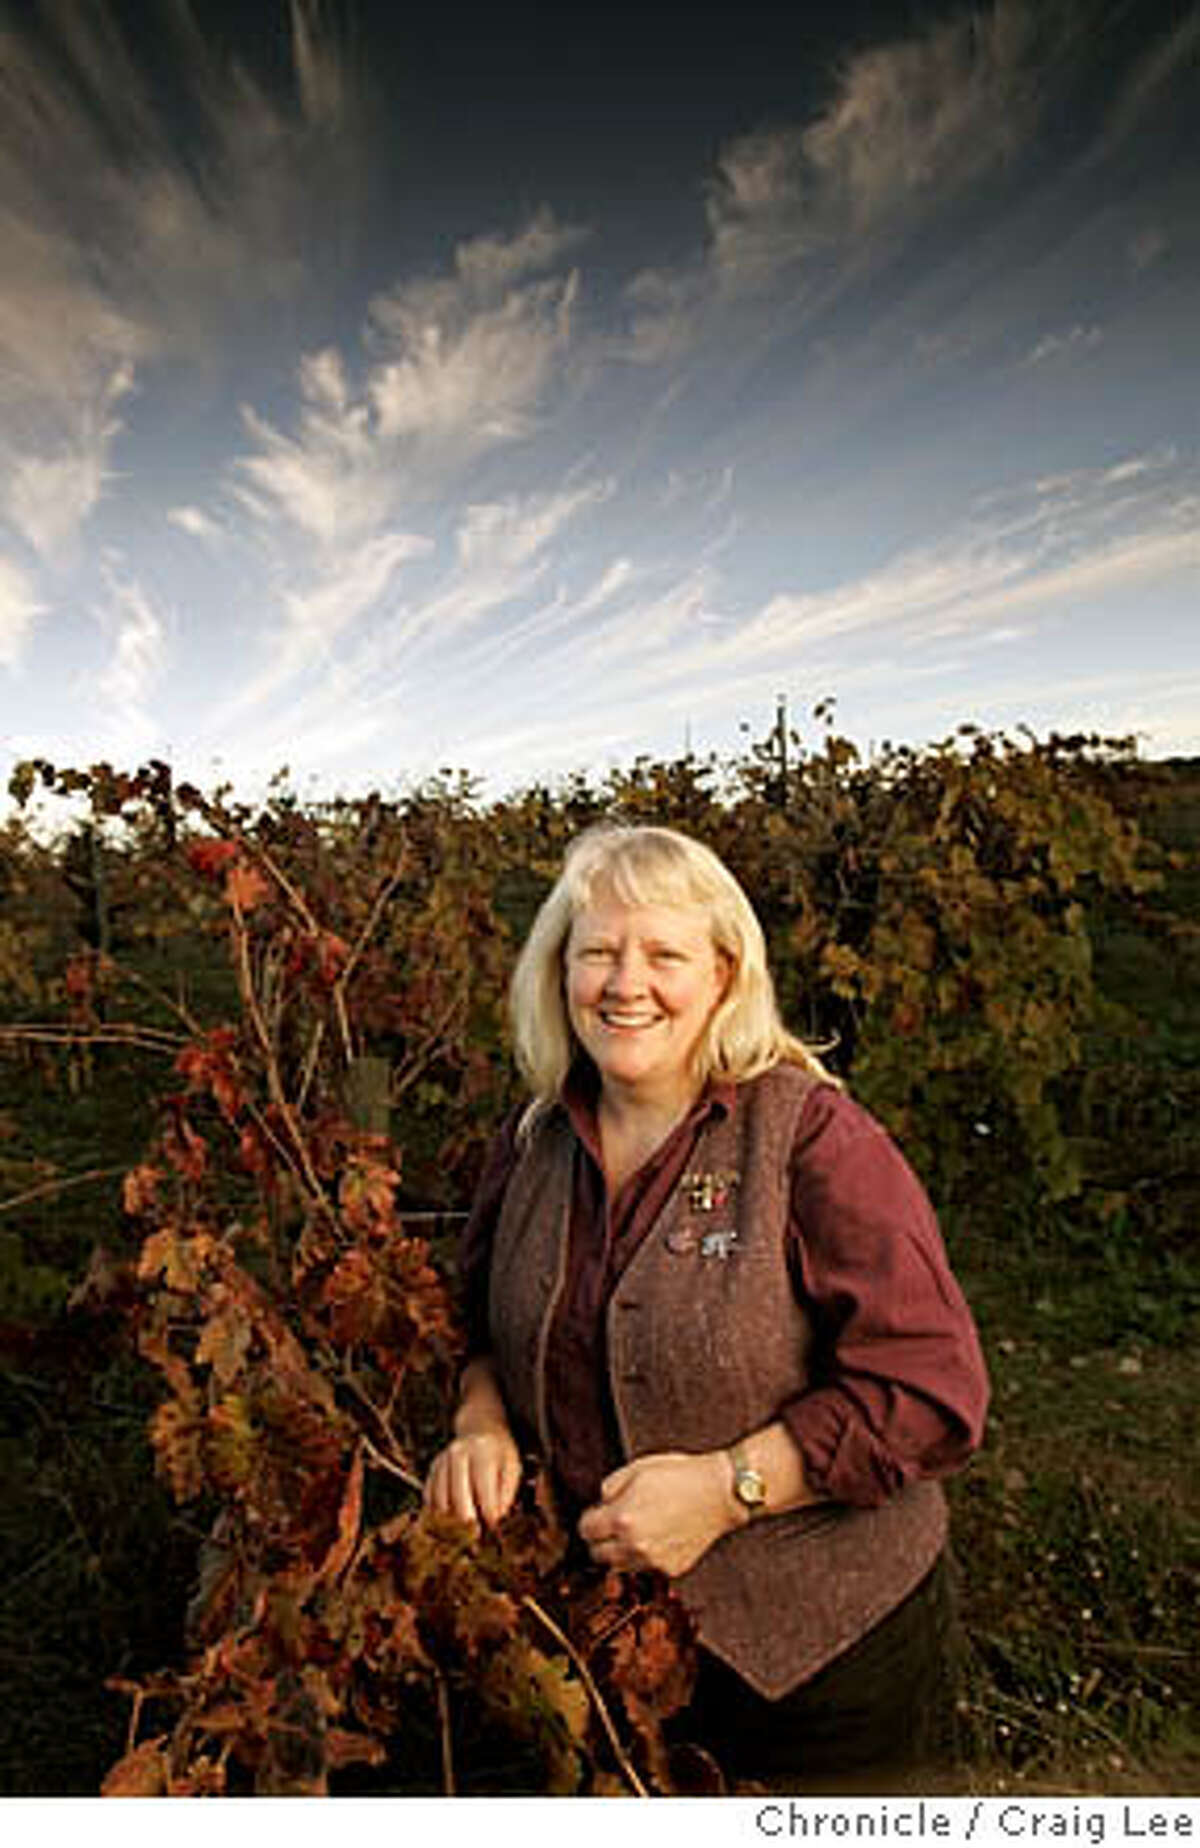 For Winemakers of the Year package. Photo of Carol Shelton in her Zinfandel vineyard. Event on 11/17/05 in Ukiah. Craig Lee / The Chronicle